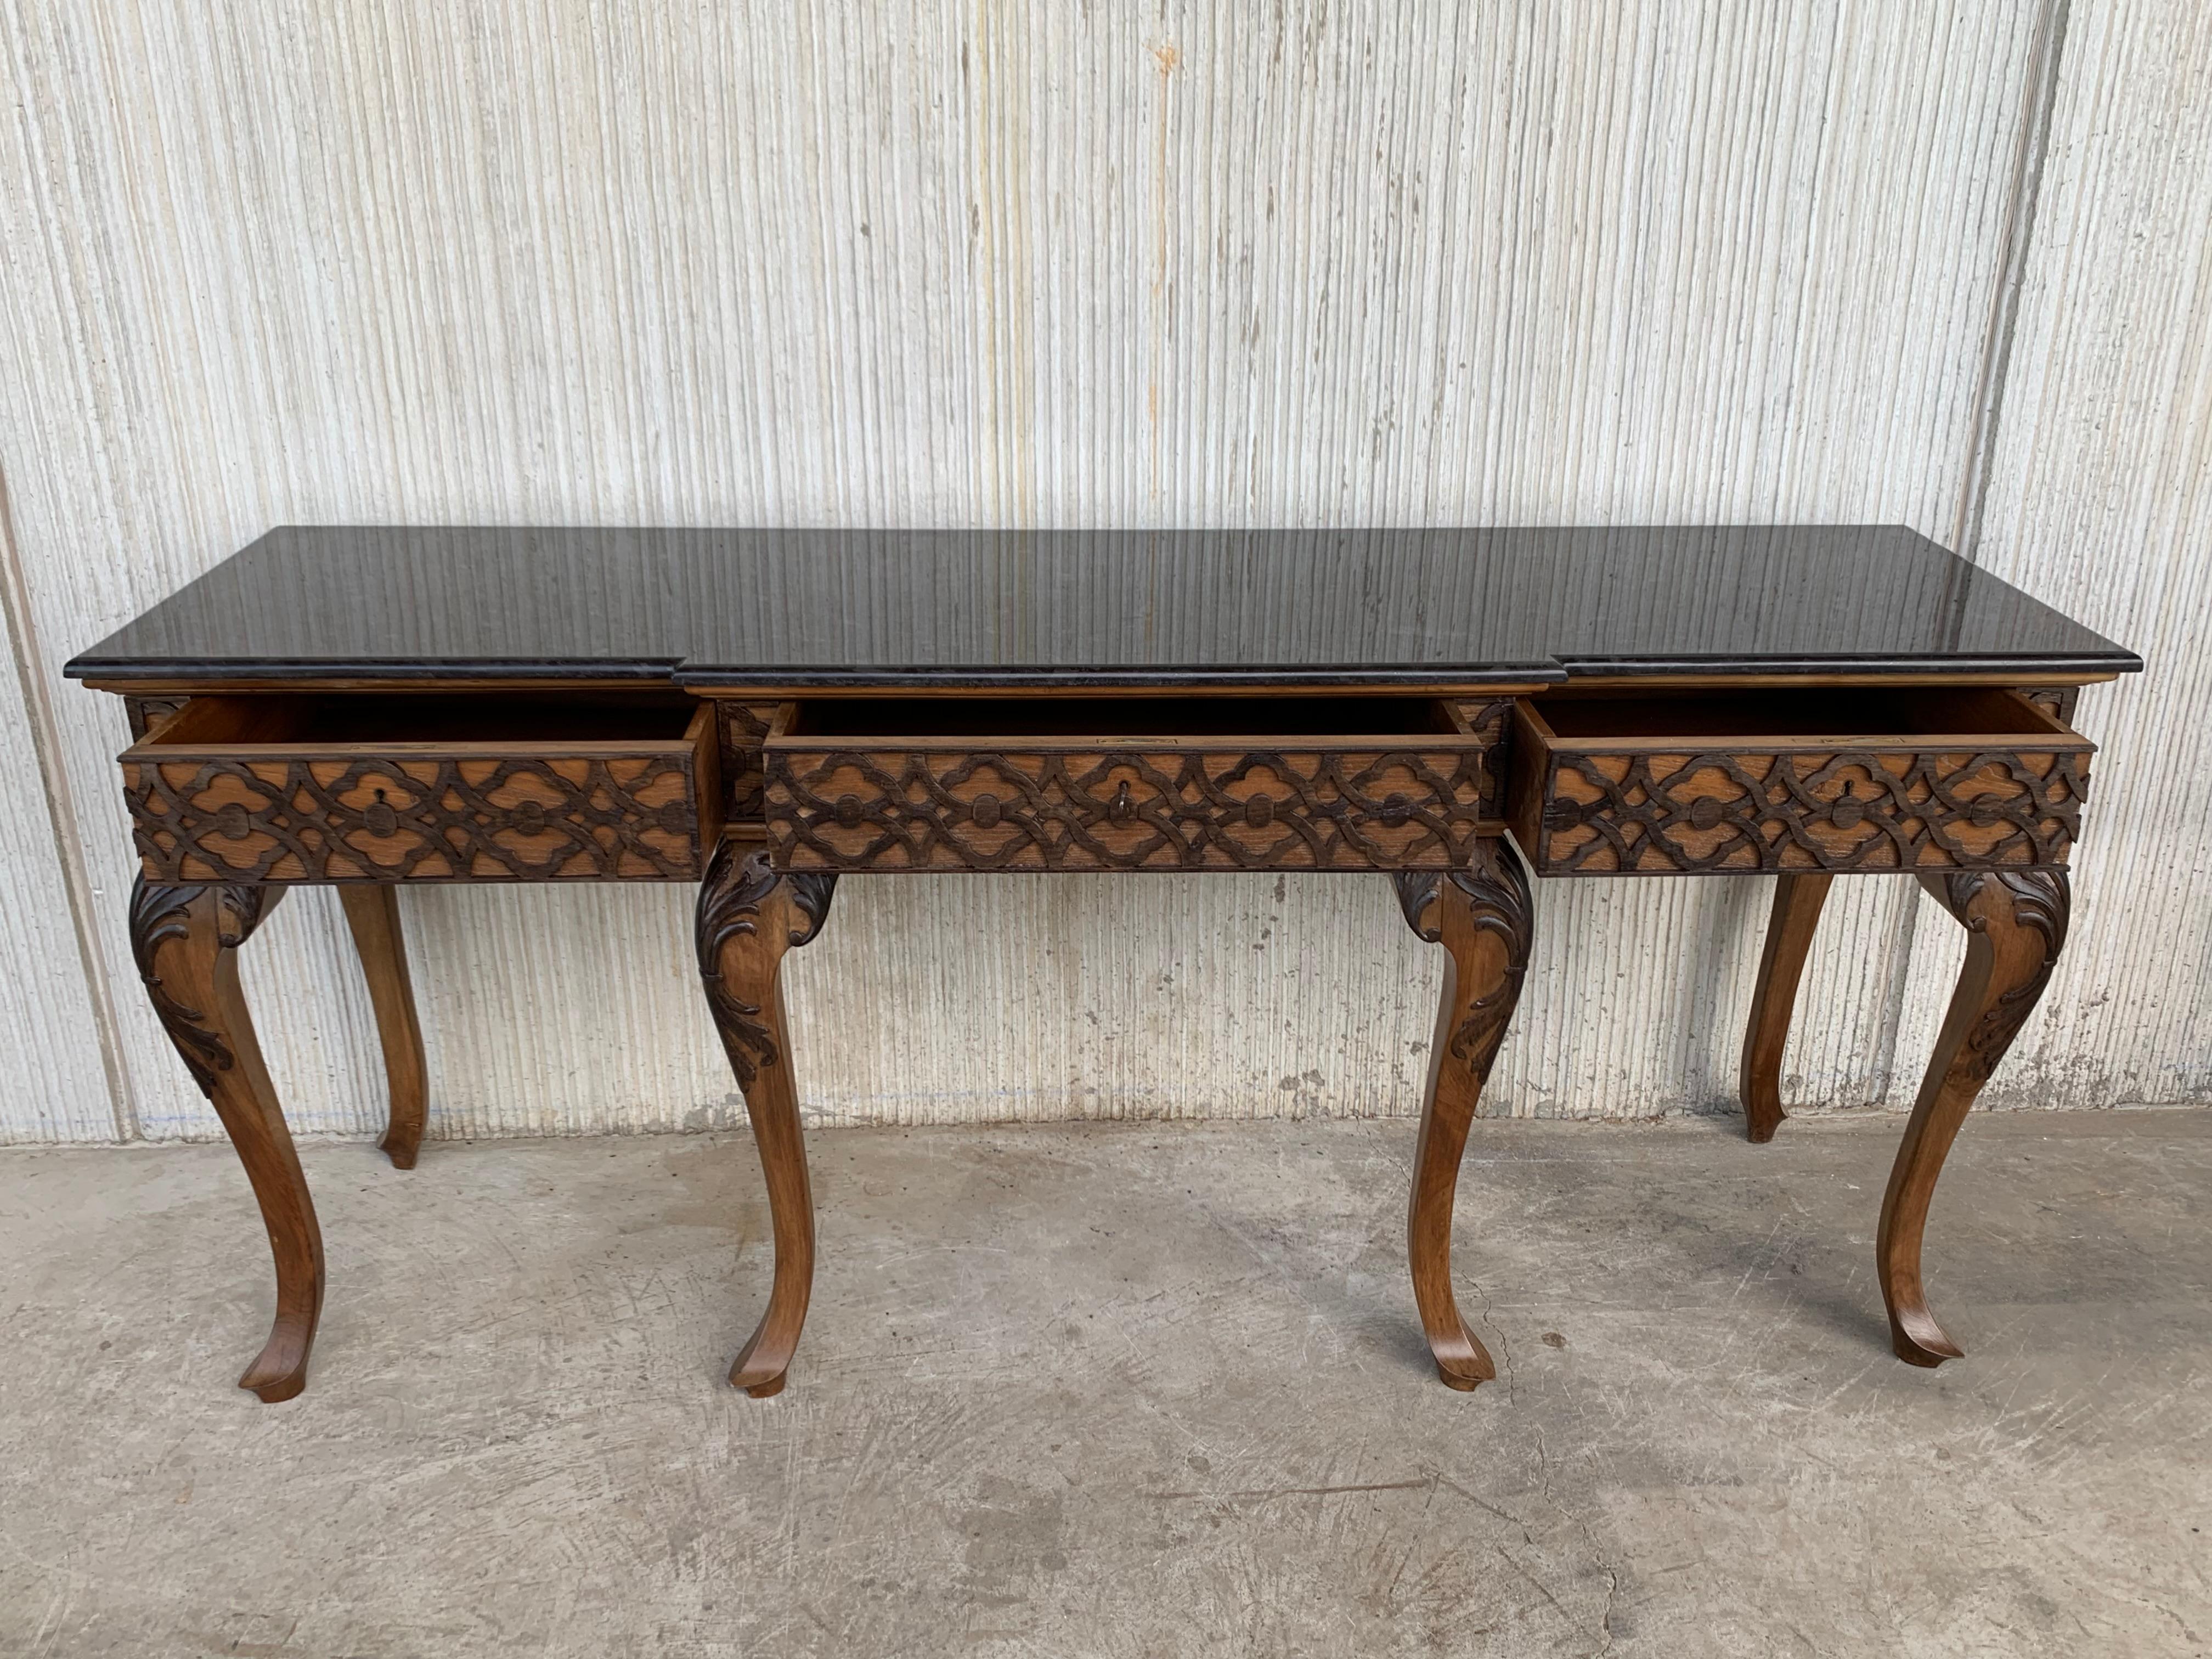 Italian 20th Century Large Console Table with Three Drawers Walnut Inlays and Marble Top